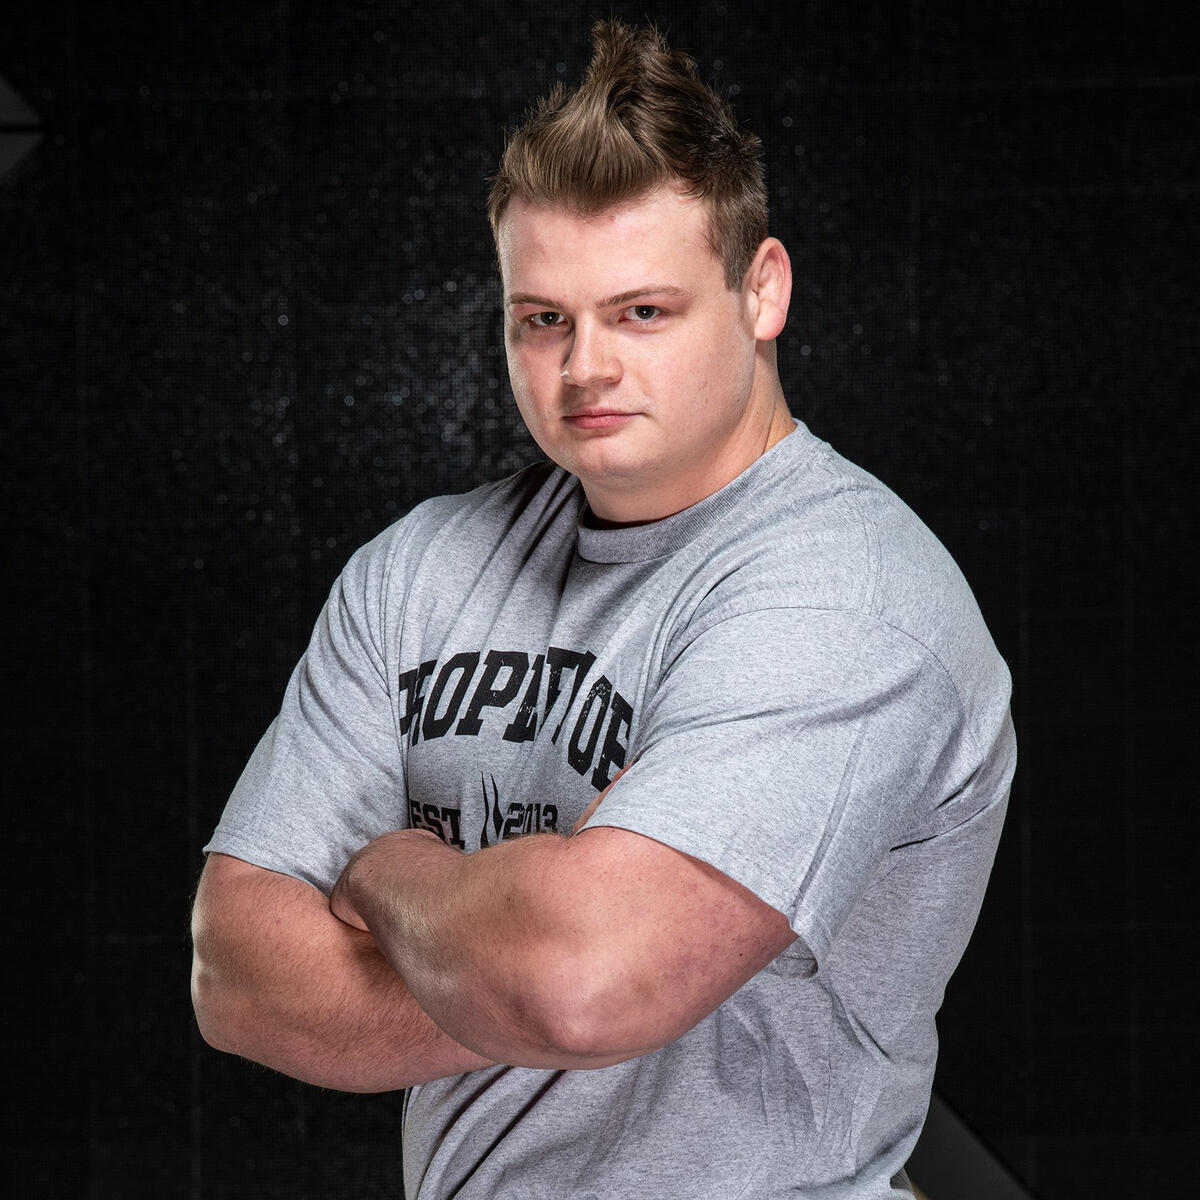 Drew Kasper is the brother of Jacob Kasper, who joined the WWE PC in October 2020. 